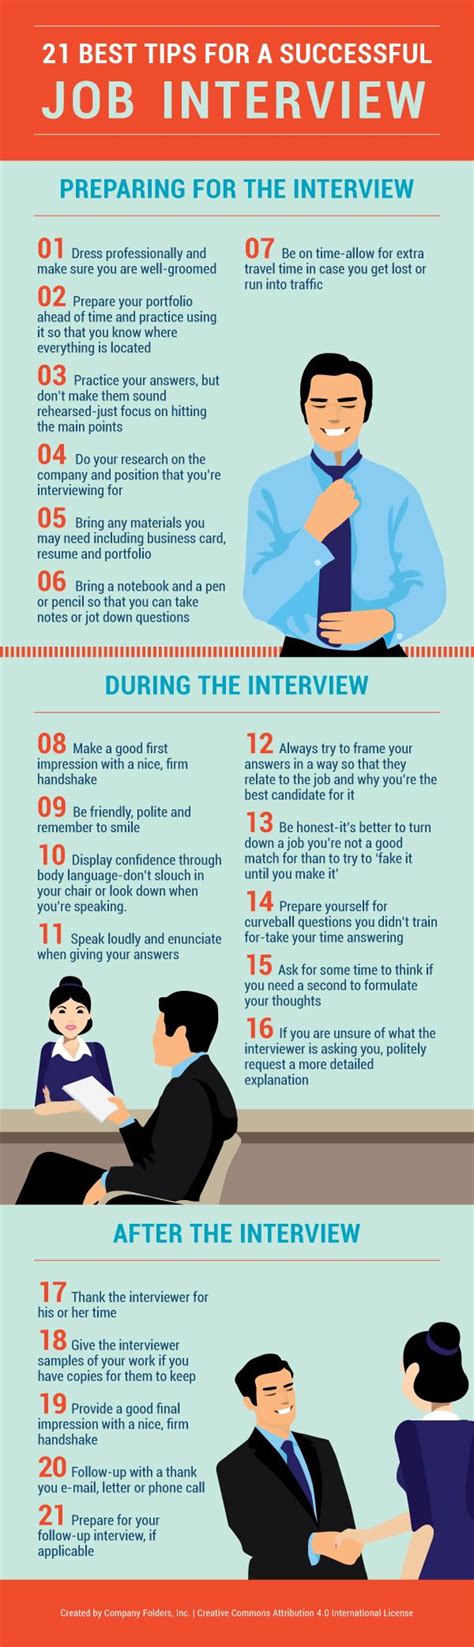 21 tips for a successful job interview [infographic] bit rebels